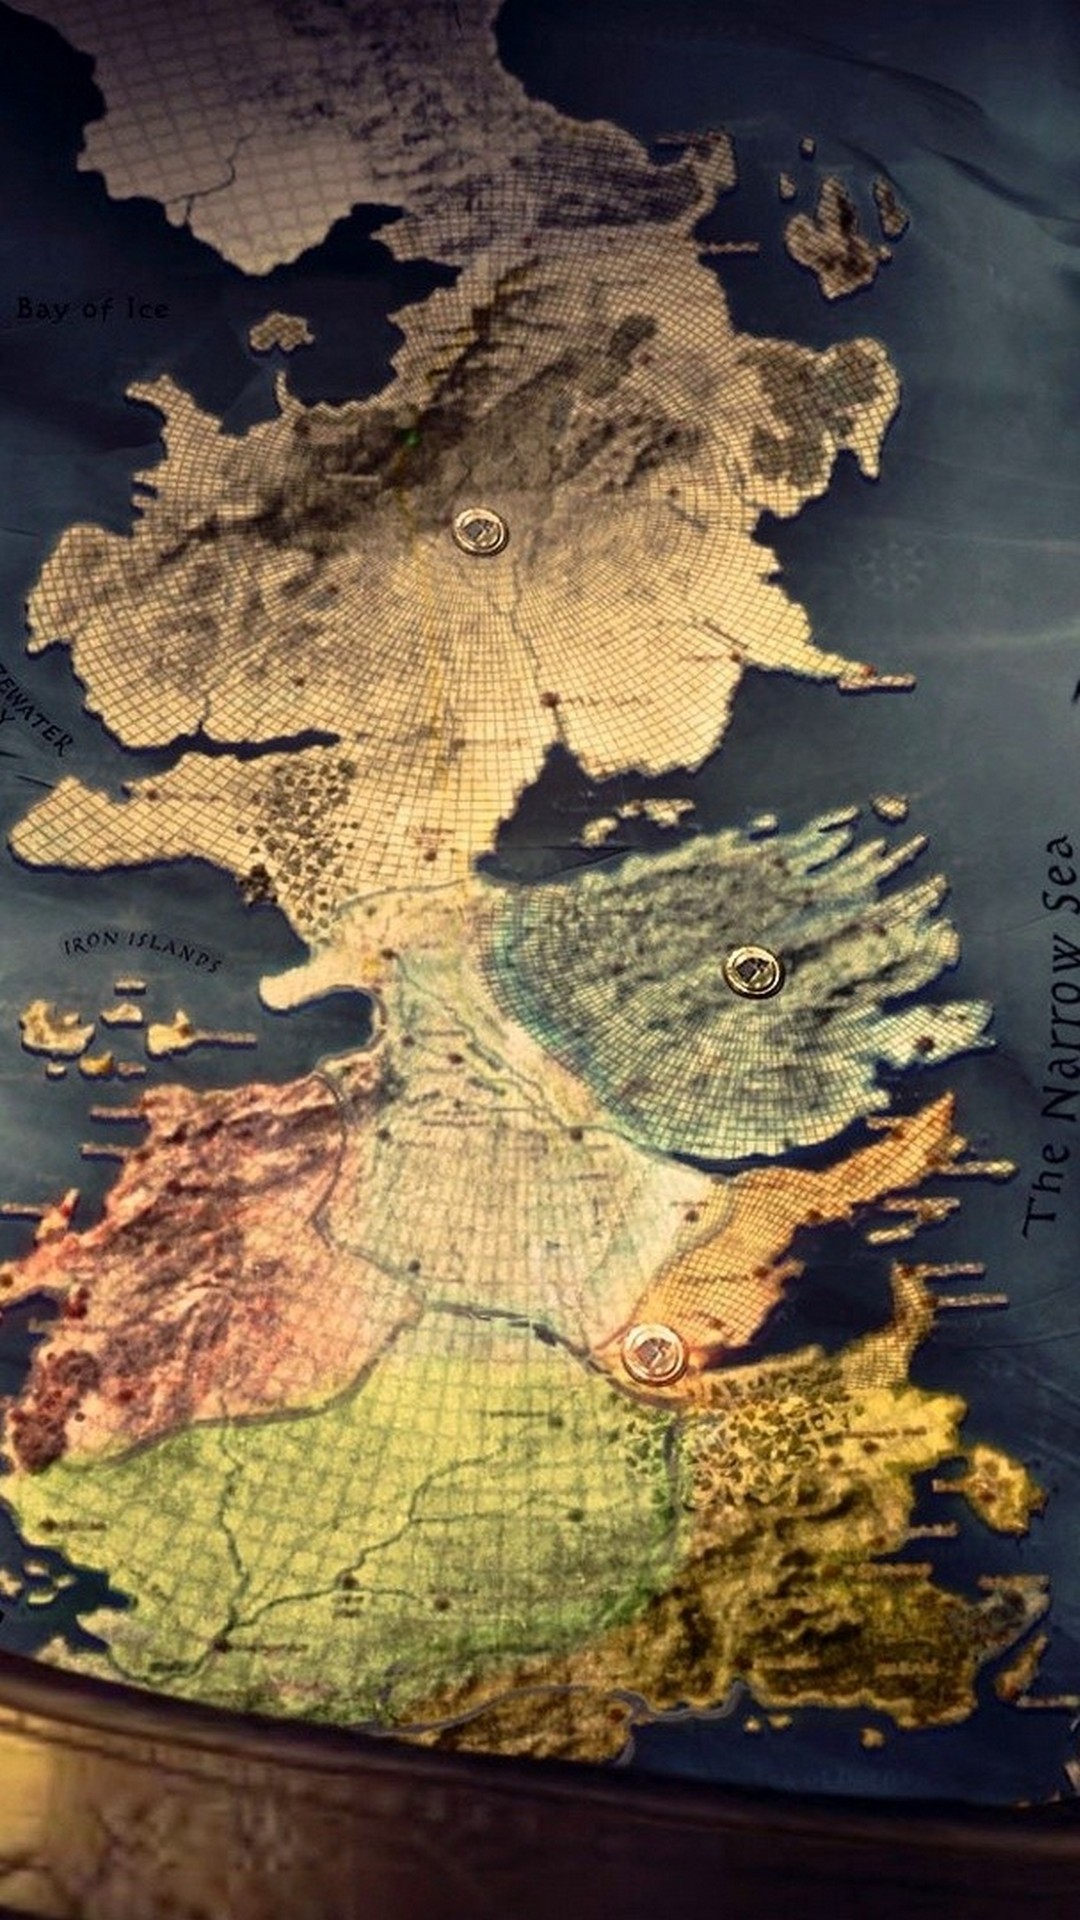 Game of Thrones Map iPhone Wallpaper With high-resolution 1080X1920 pixel. You can use this wallpaper for your iPhone 5, 6, 7, 8, X, XS, XR backgrounds, Mobile Screensaver, or iPad Lock Screen